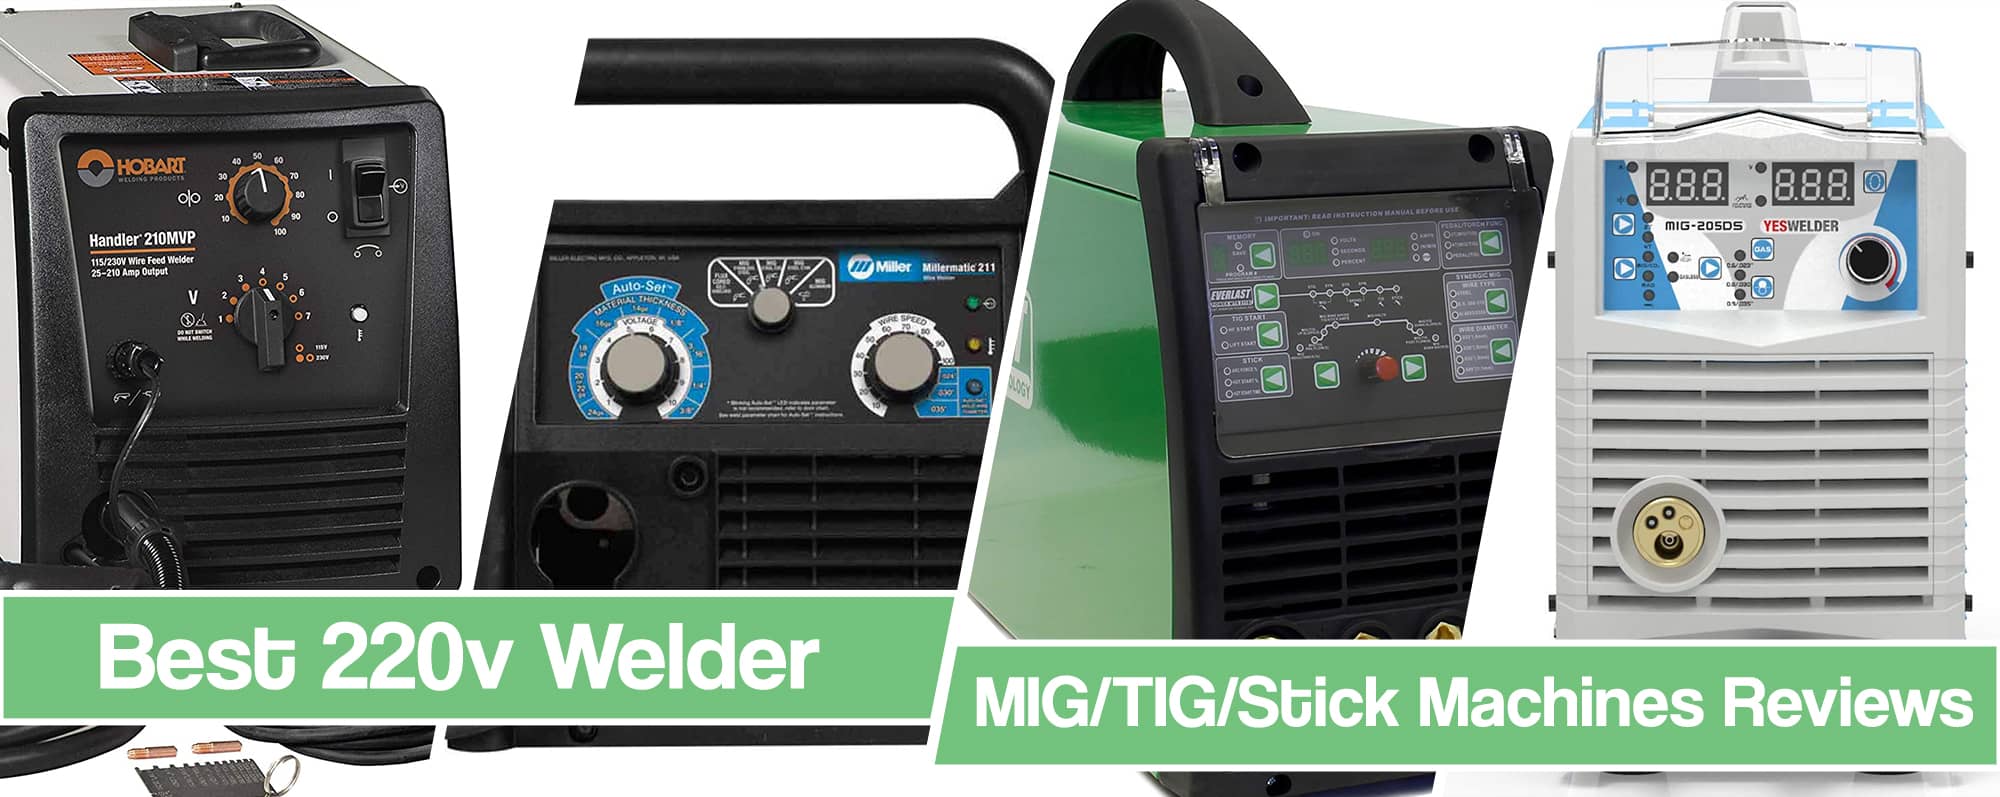 Best 220V Welders For Home- Reviews For MIG/TIG/FC/Stick and Multi-Process Welding Machines Plus Buyers Guide and Comparison Table